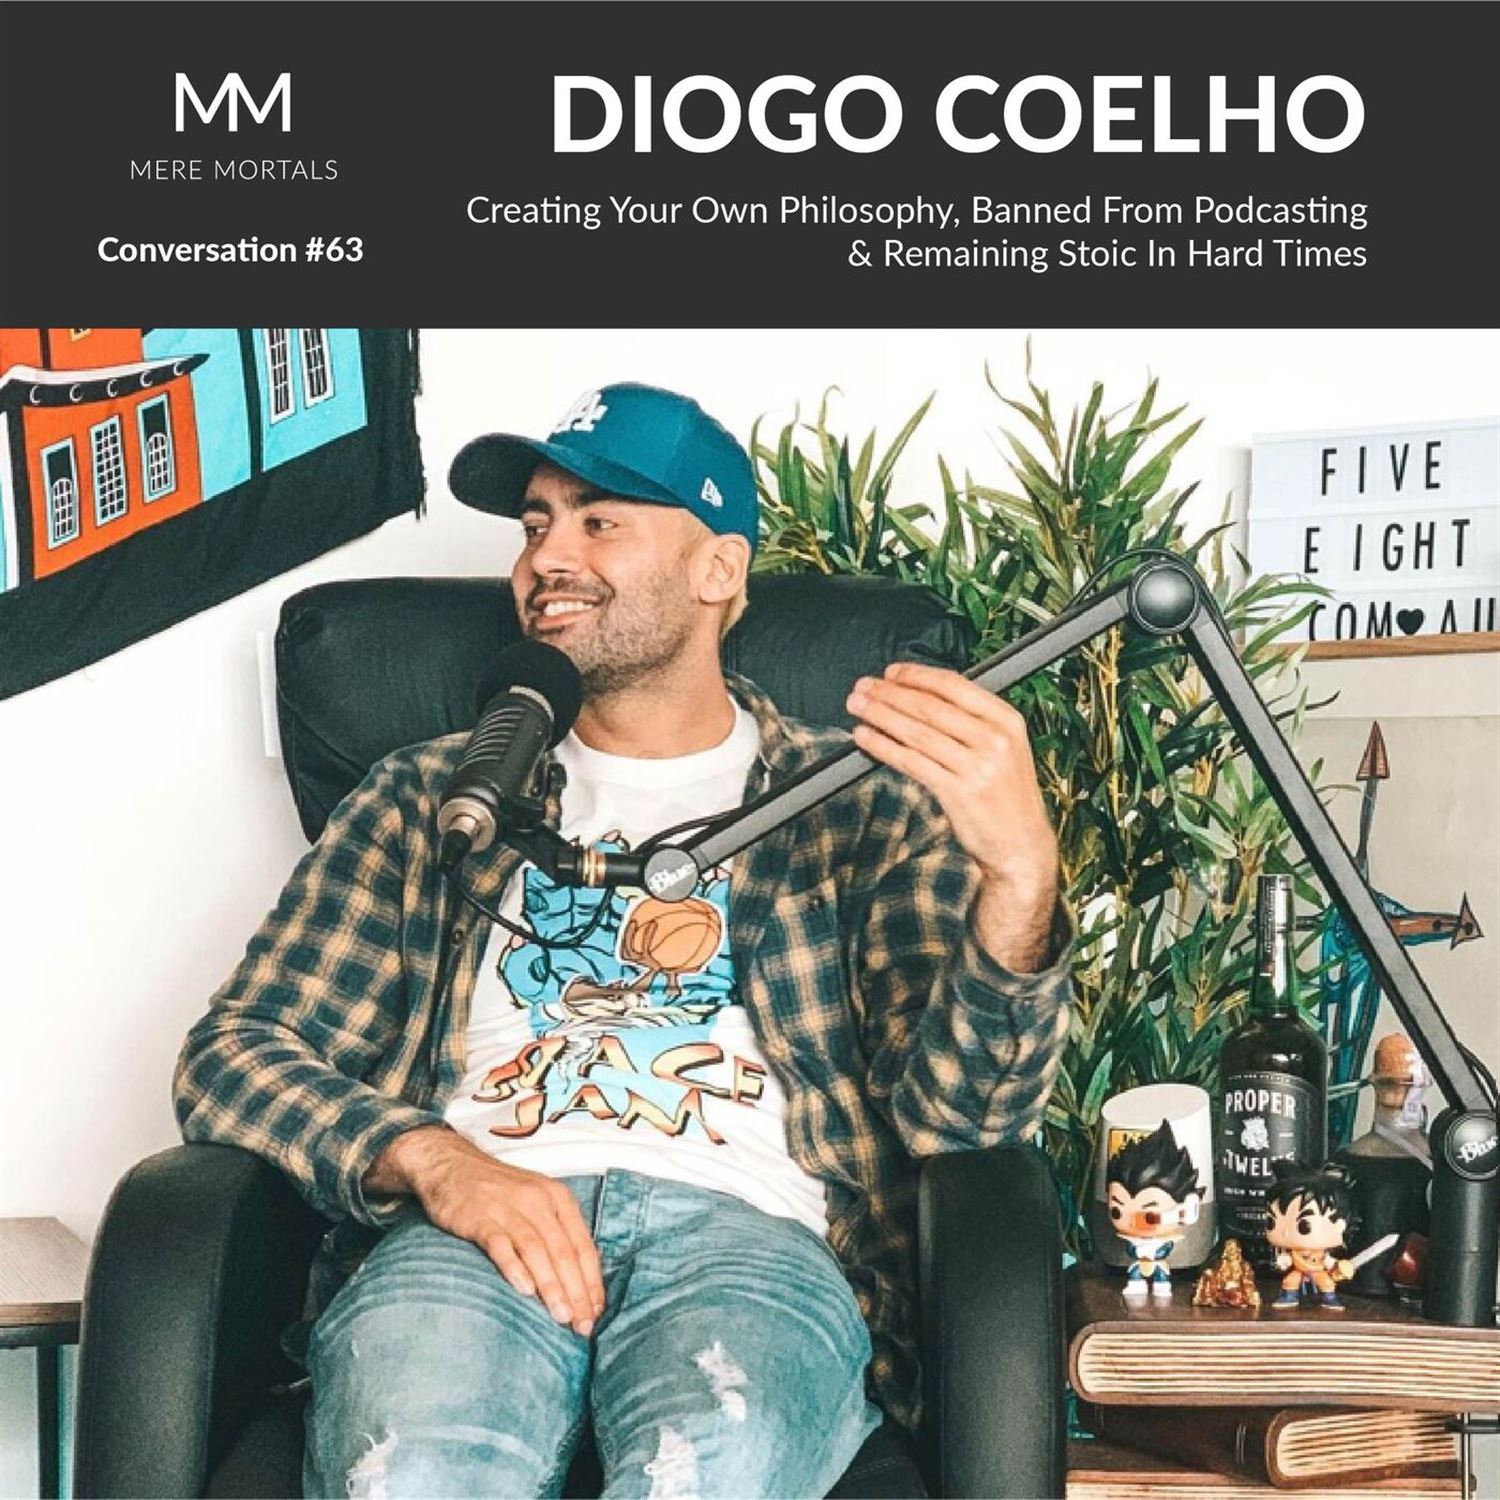 DIOGO COELHO | Creating Your Own Philosophy, Banned From Podcasting & Remaining Stoic In Hard Times